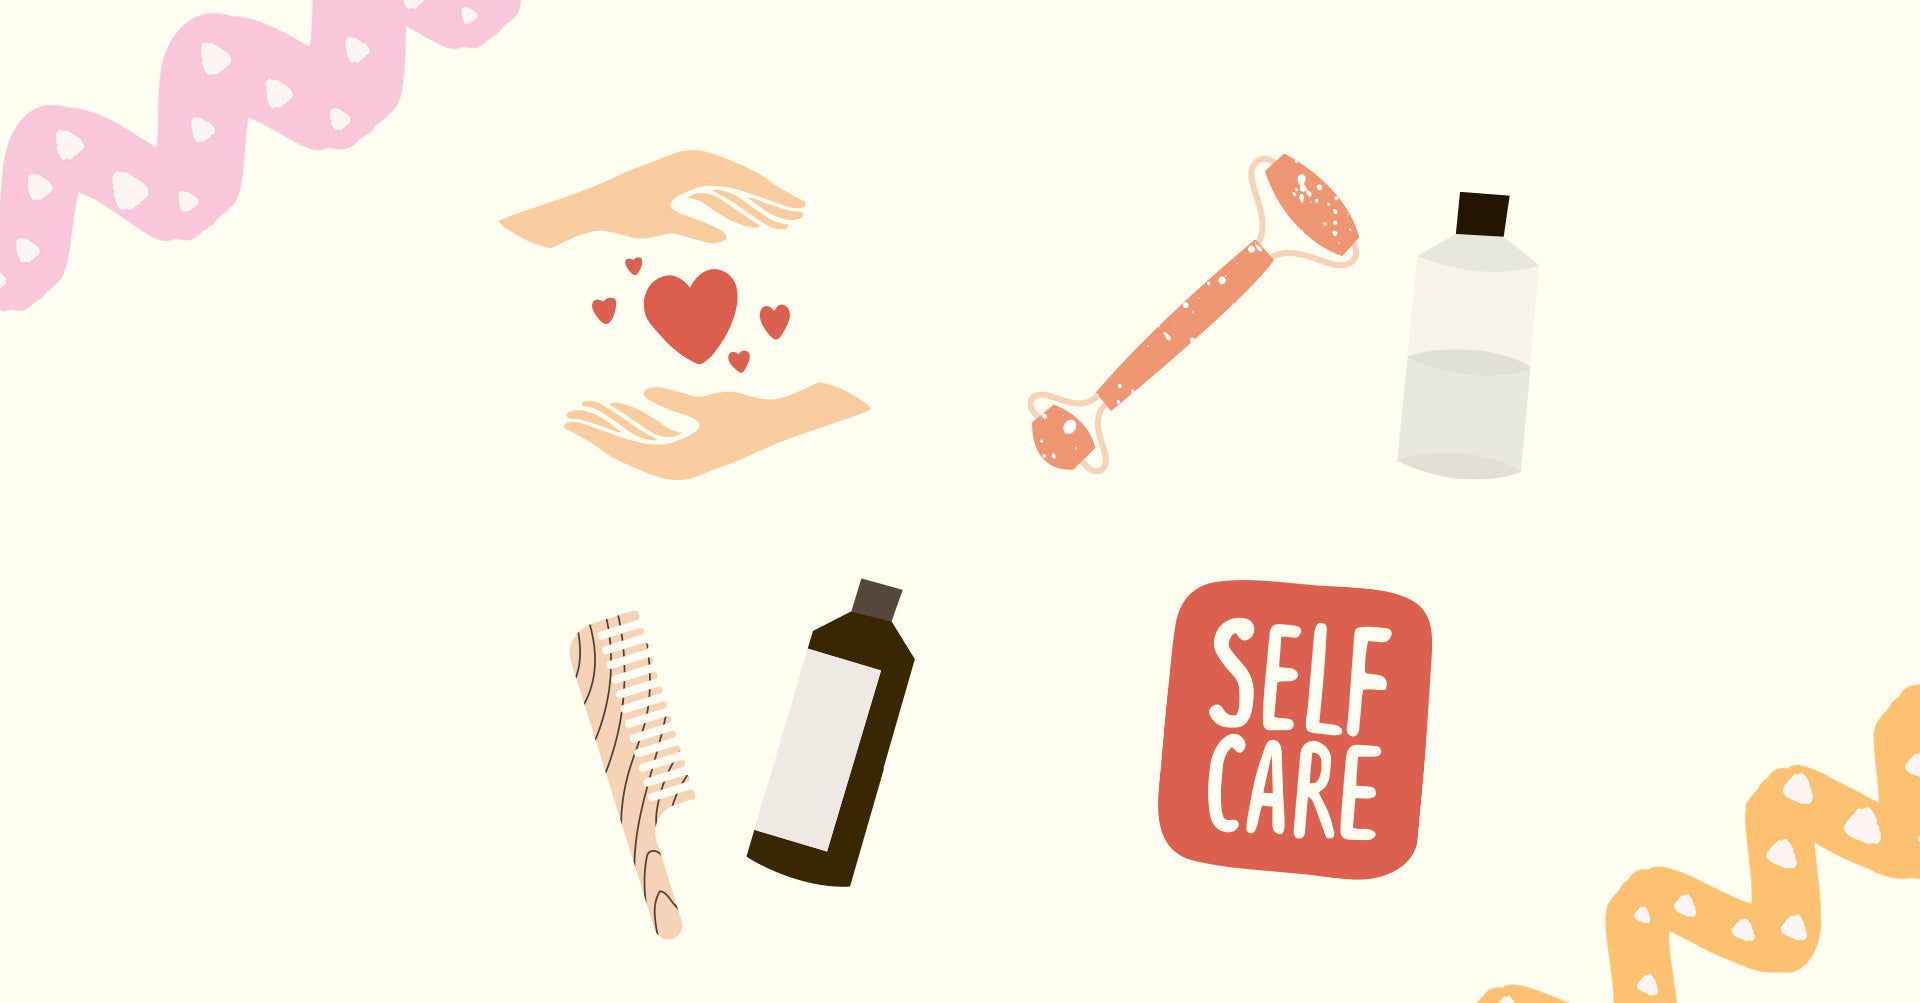 What Is Self Care?